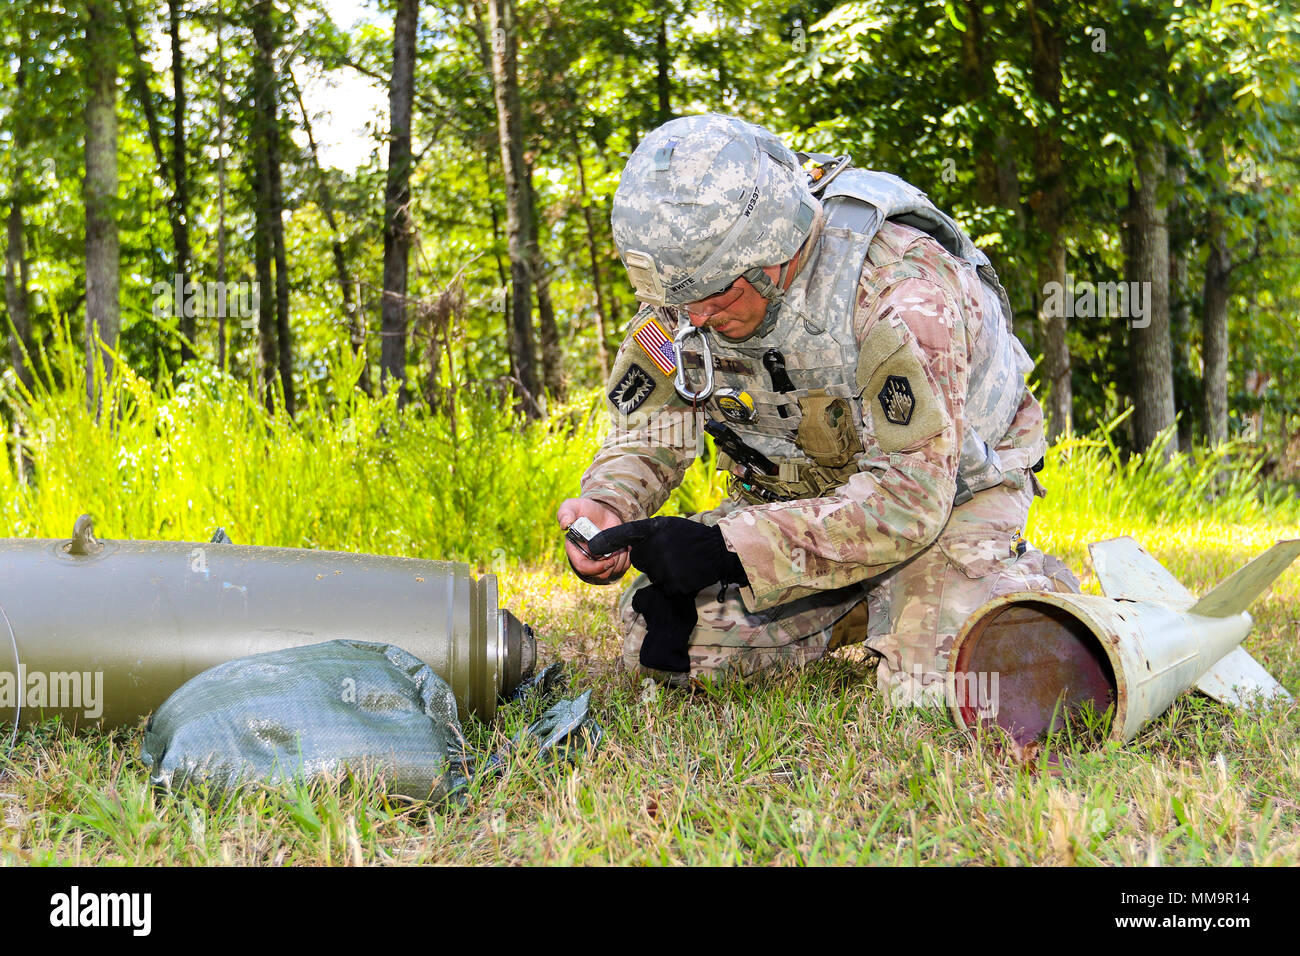 Sgt. Paul White, assigned to 9th Chemical Company (Technical Escort) at  Joint Base Lewis-McChord, Wash., uses a camera to document the type of  ordnance device he has encountered during the fifth annual